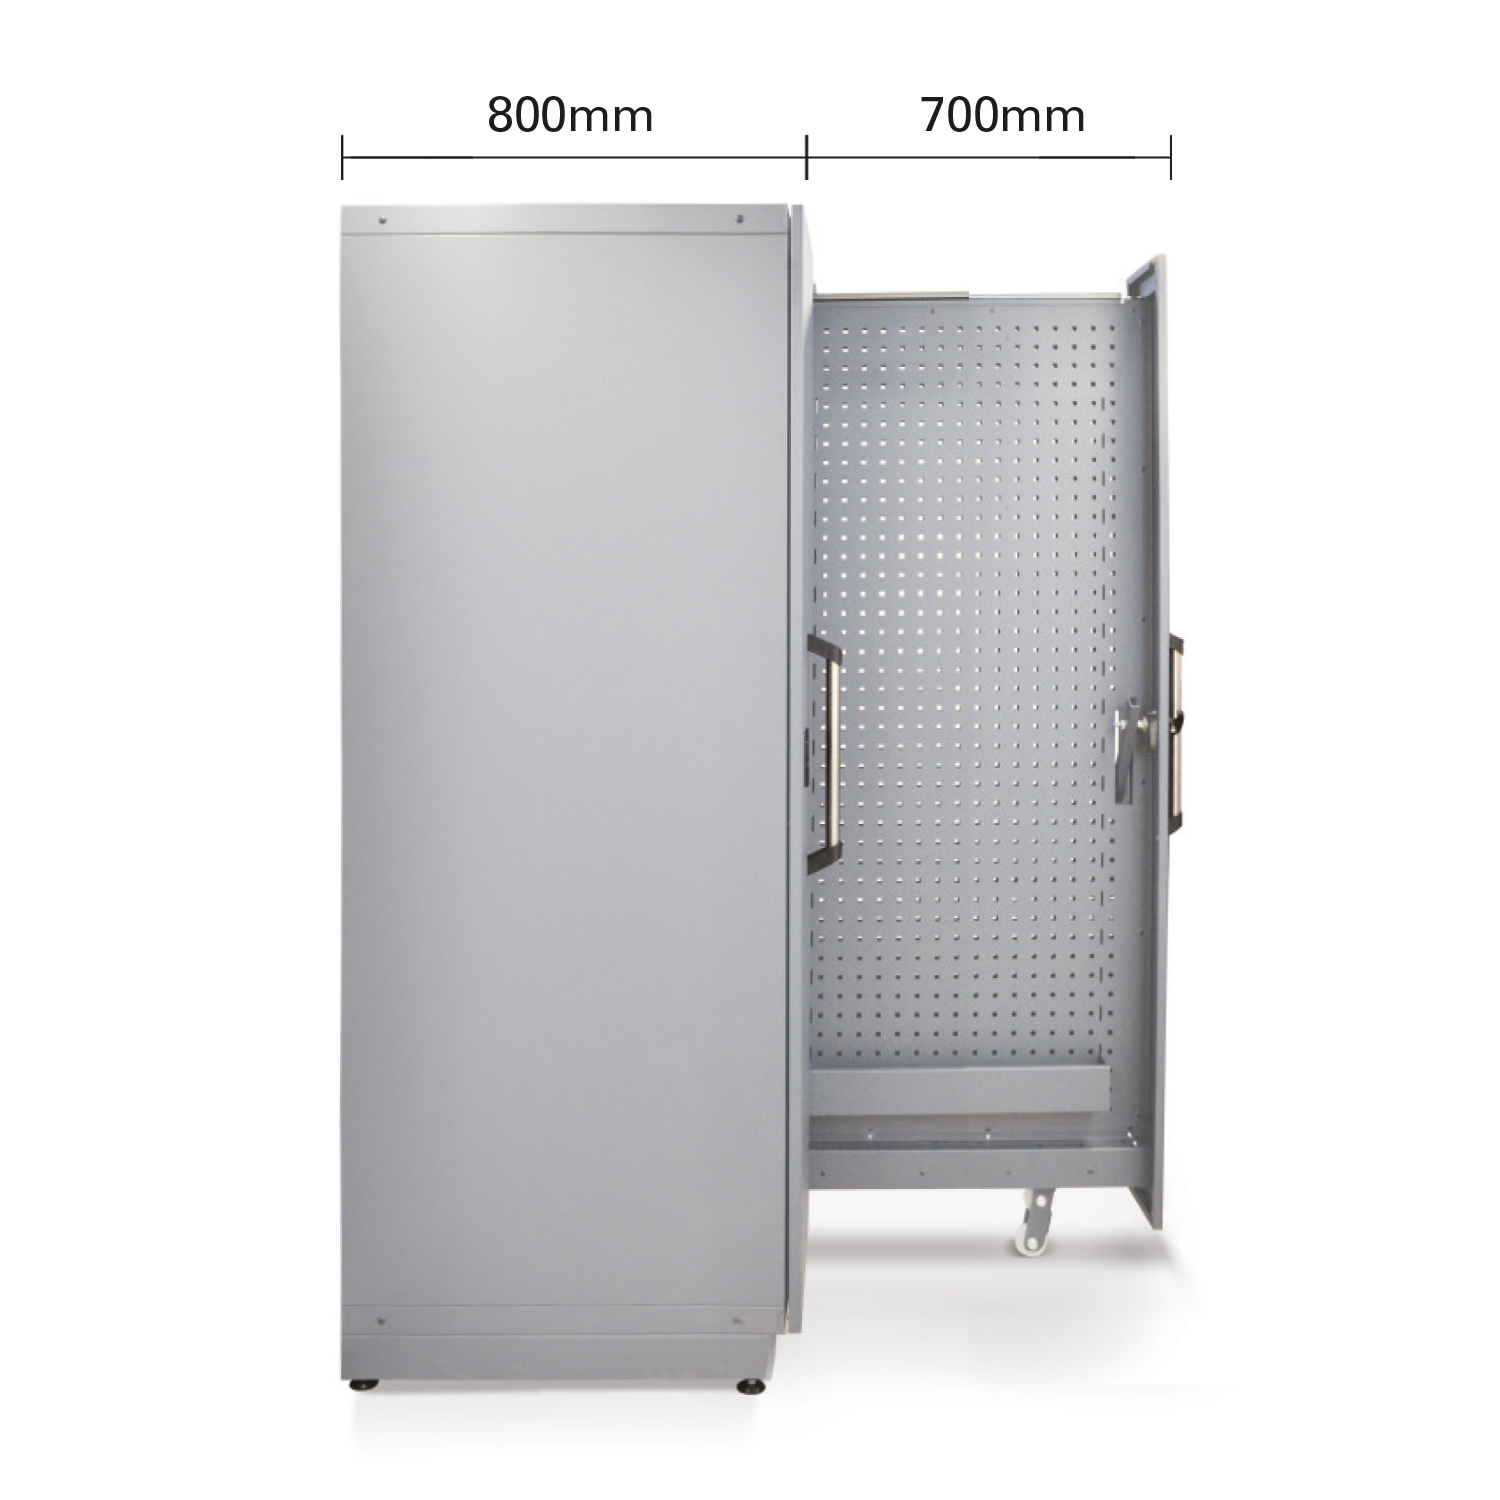 Vertical Special Service Tool Cabinets (800mm deep)